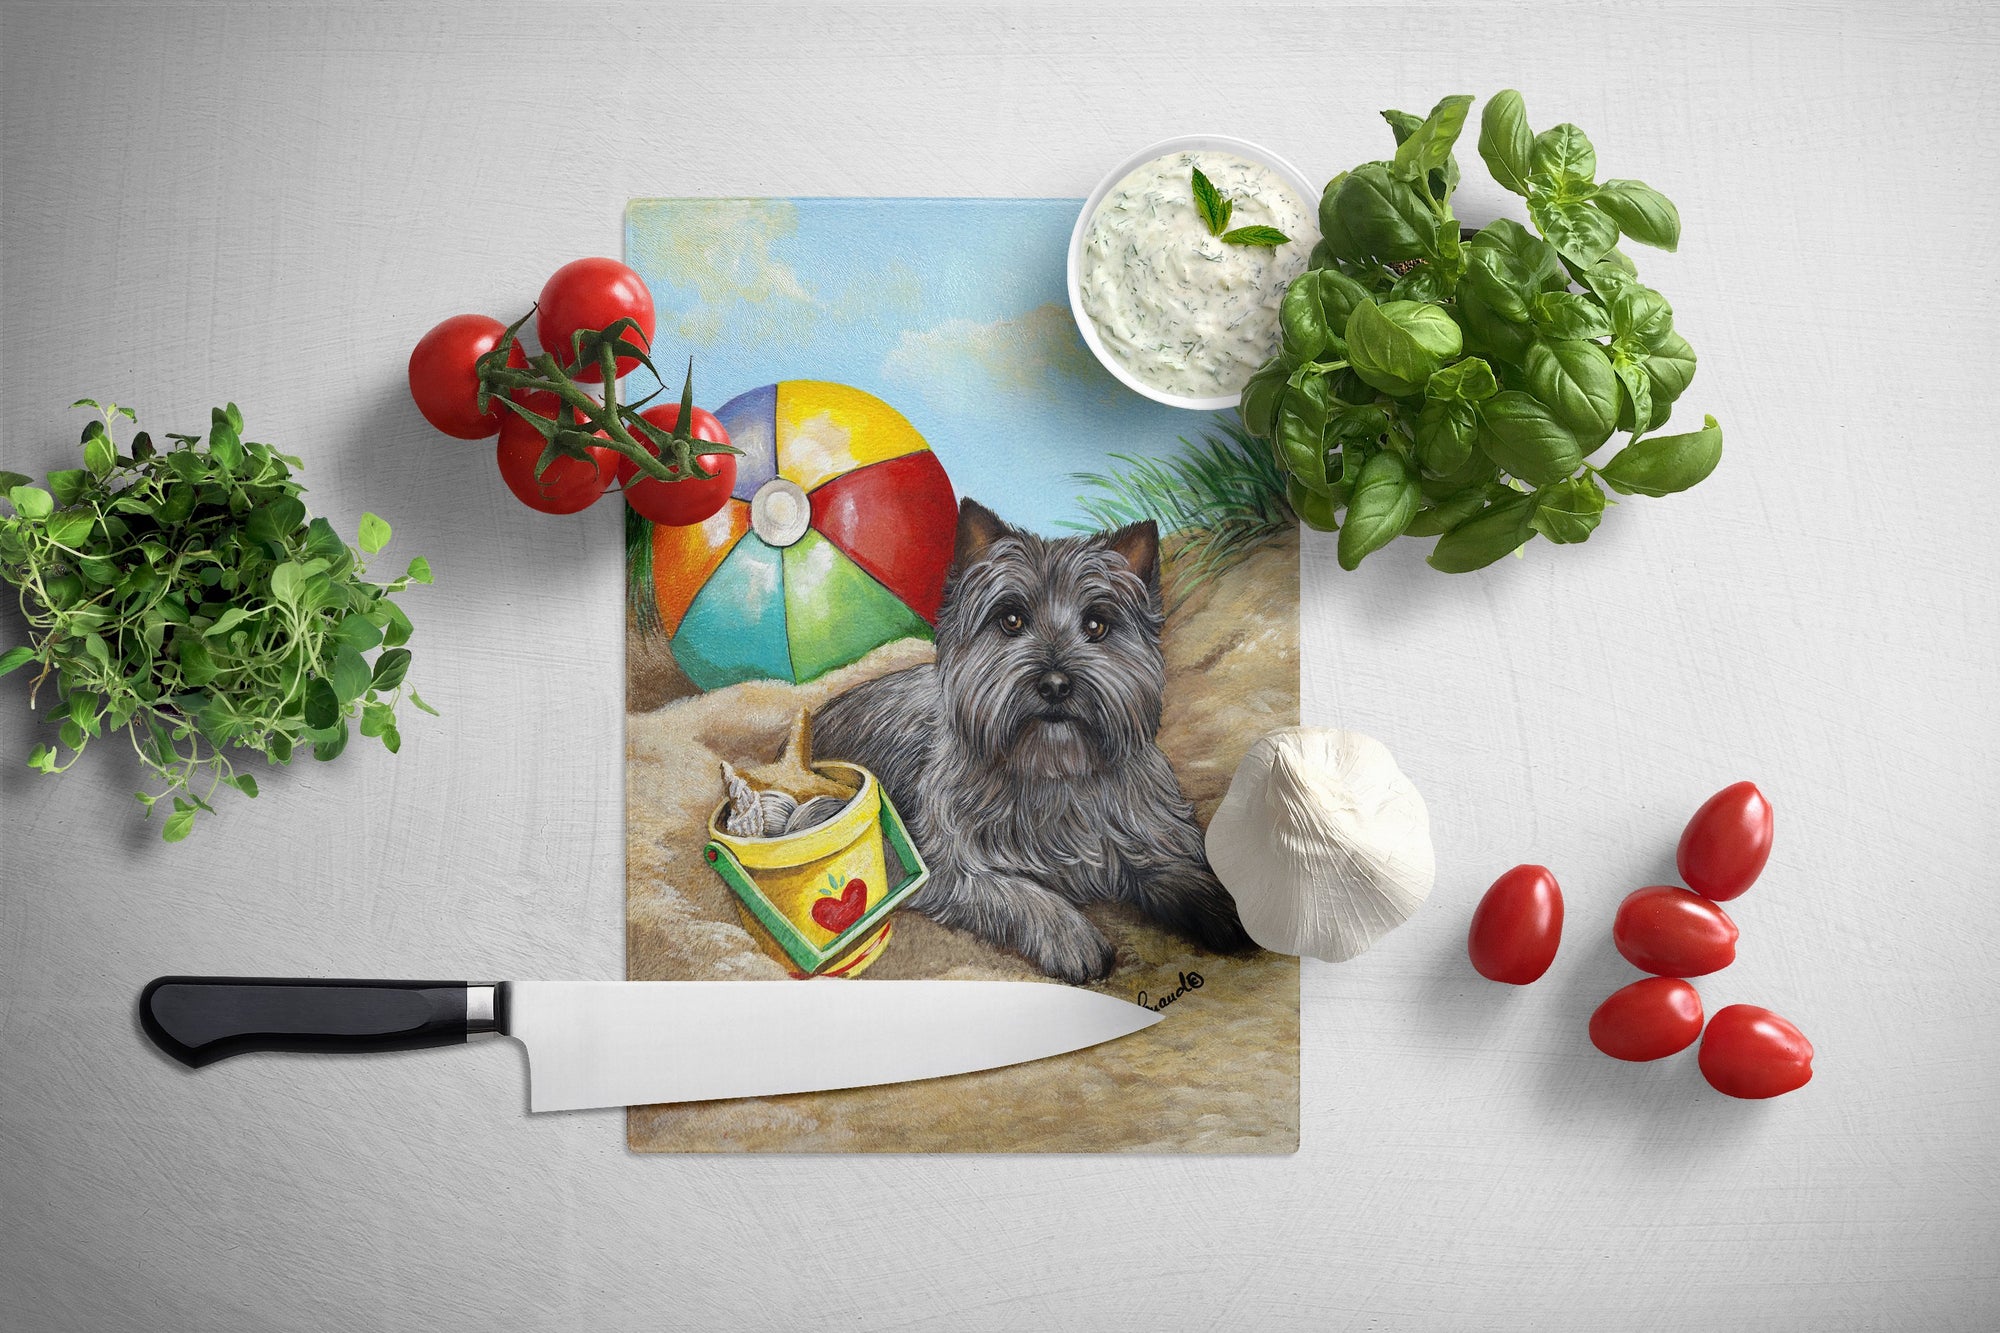 Cairn Terrier At the Beach Glass Cutting Board Large PPP3048LCB by Caroline's Treasures